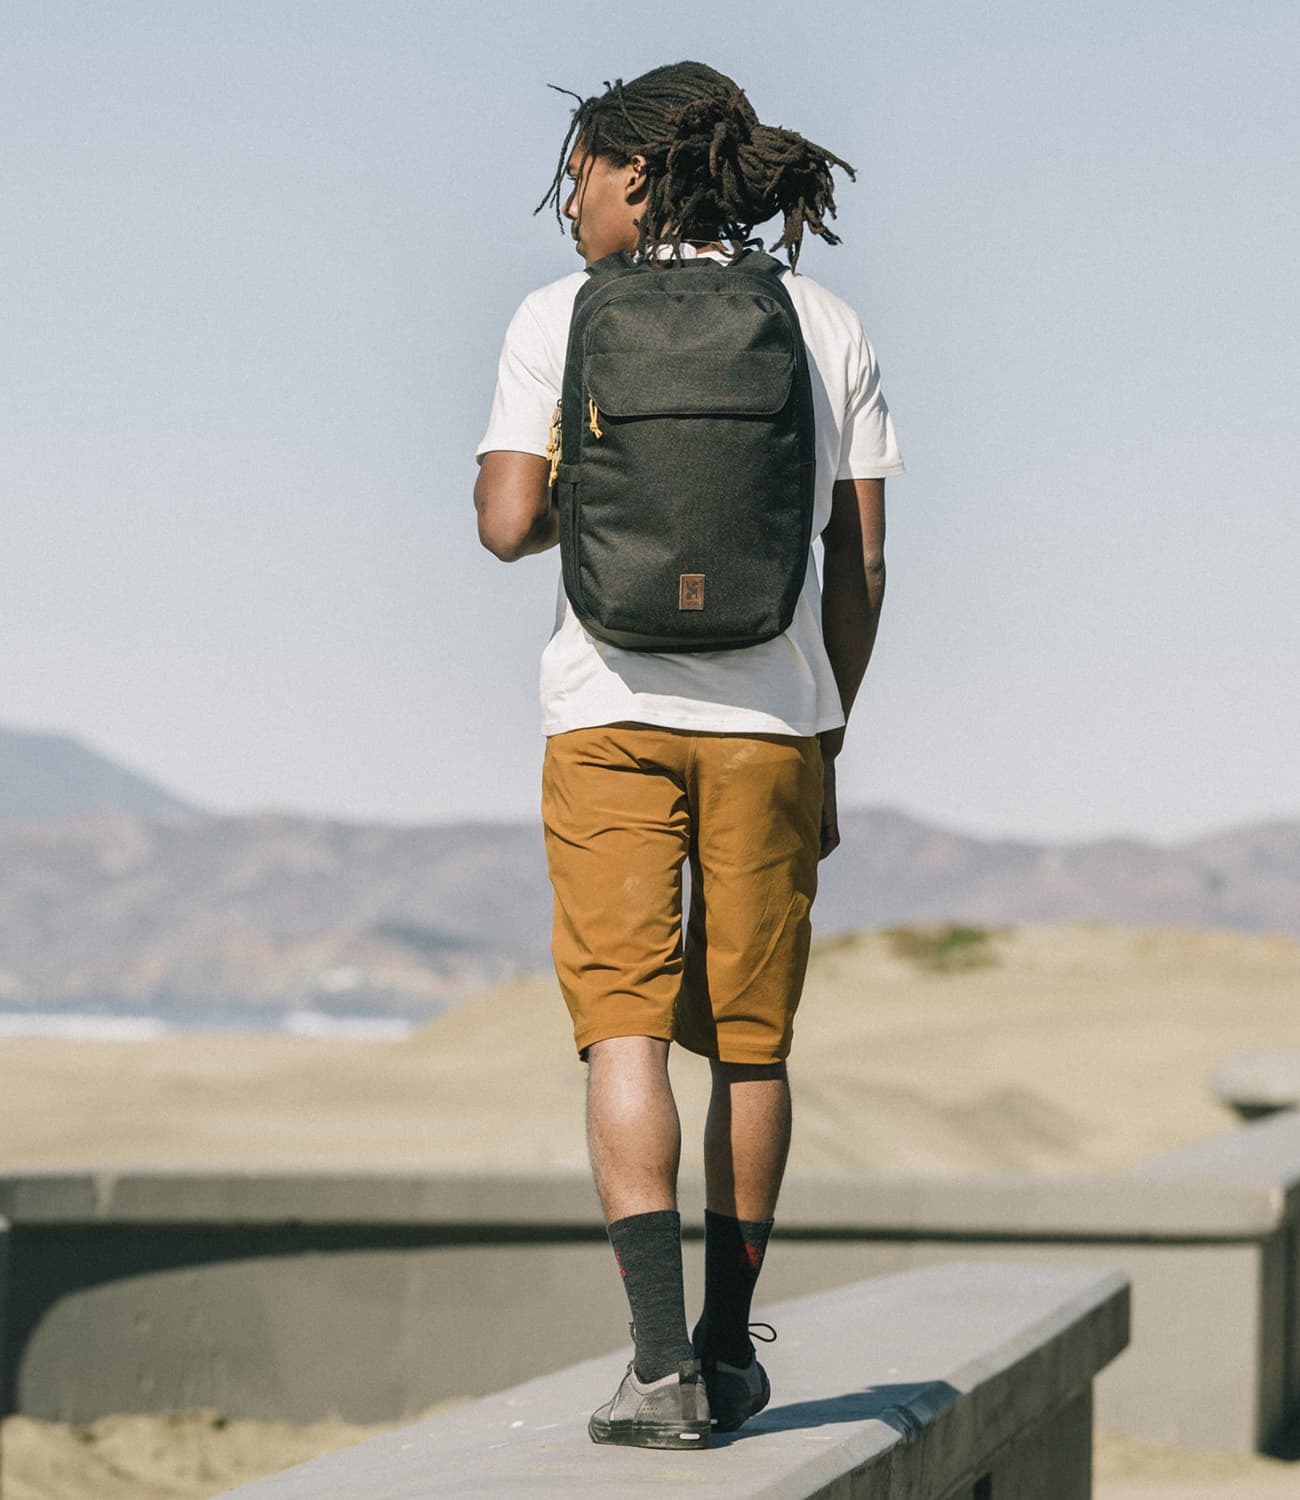 Water-resistant Ruckas 23L Backpack worn by a person on the beach